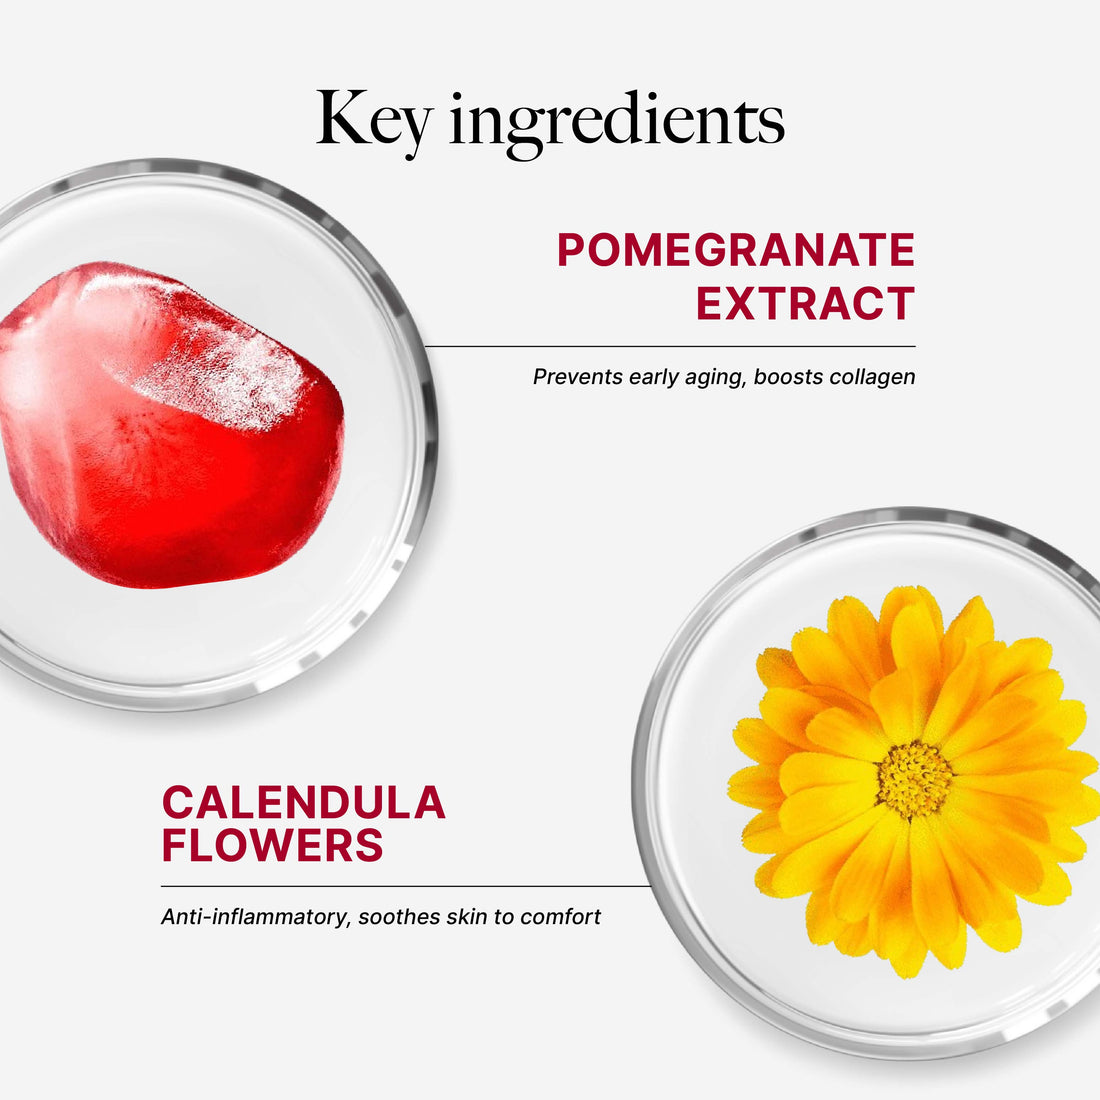 CLEF Pomegranate Instant Calming Mask